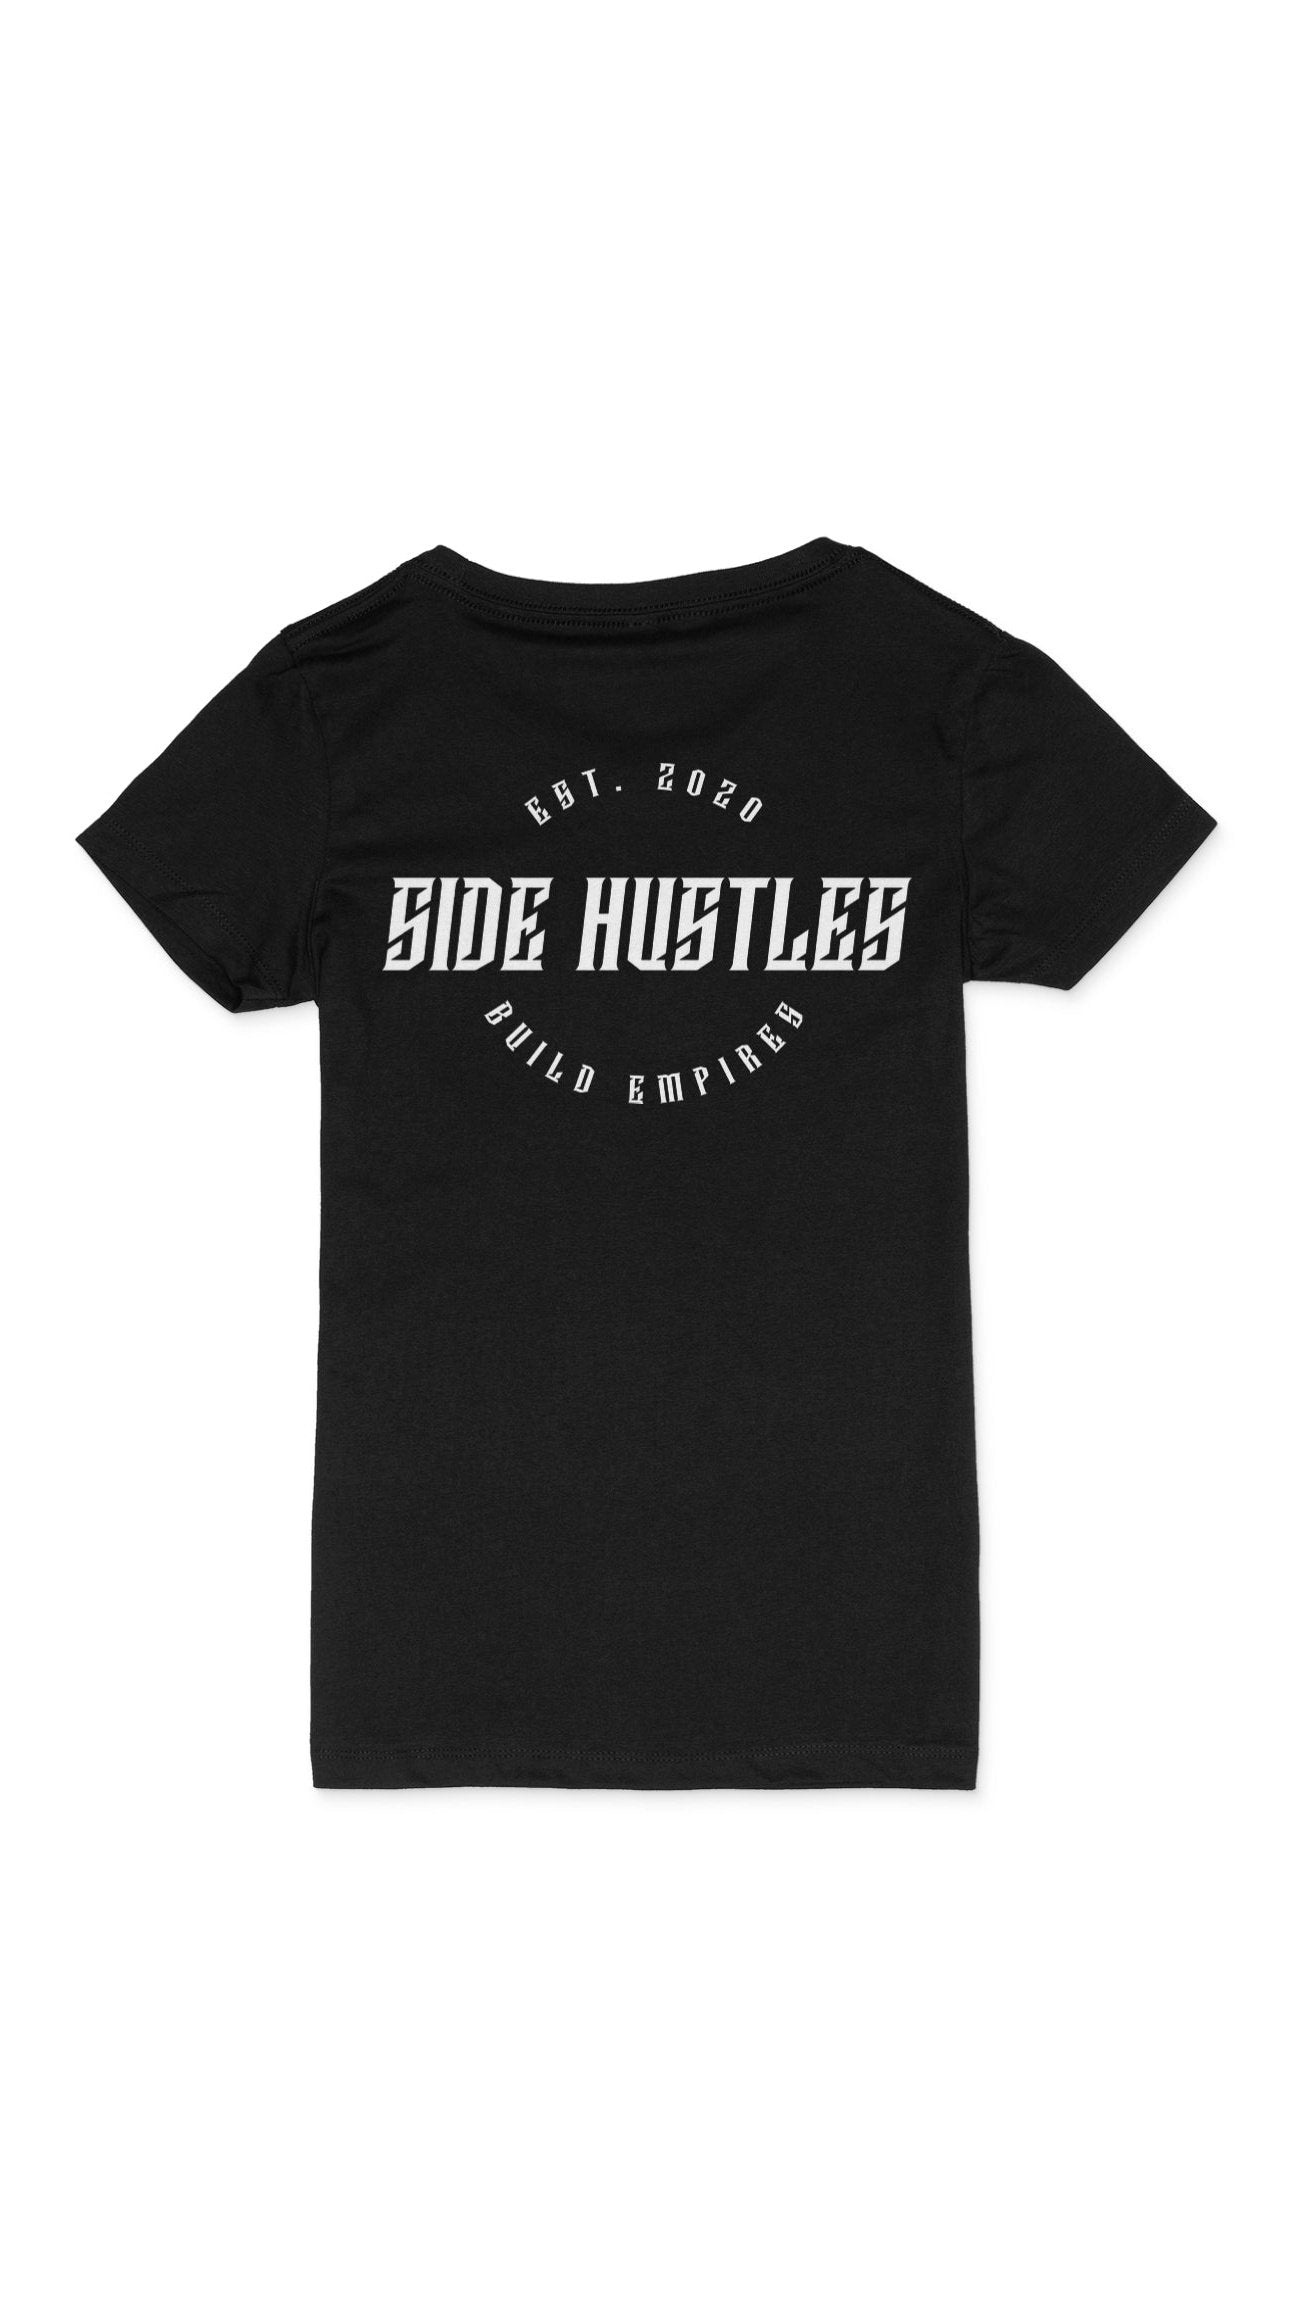 Black soft womens side hustle merch t shirt with screen printed design on back